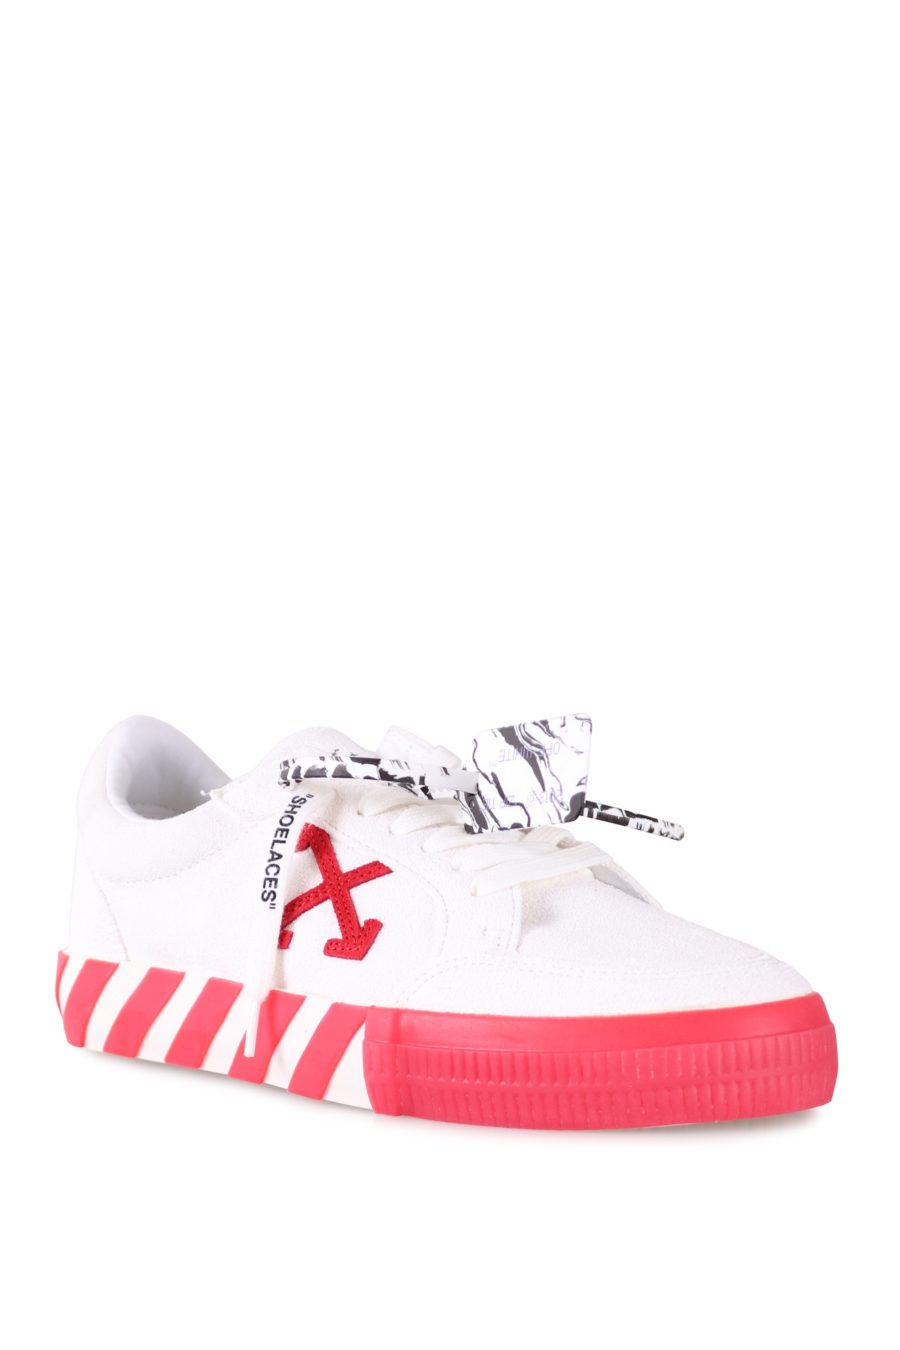 Trainers Off-White white with red - eefee4183939d940002463307f836362d91940cdc5